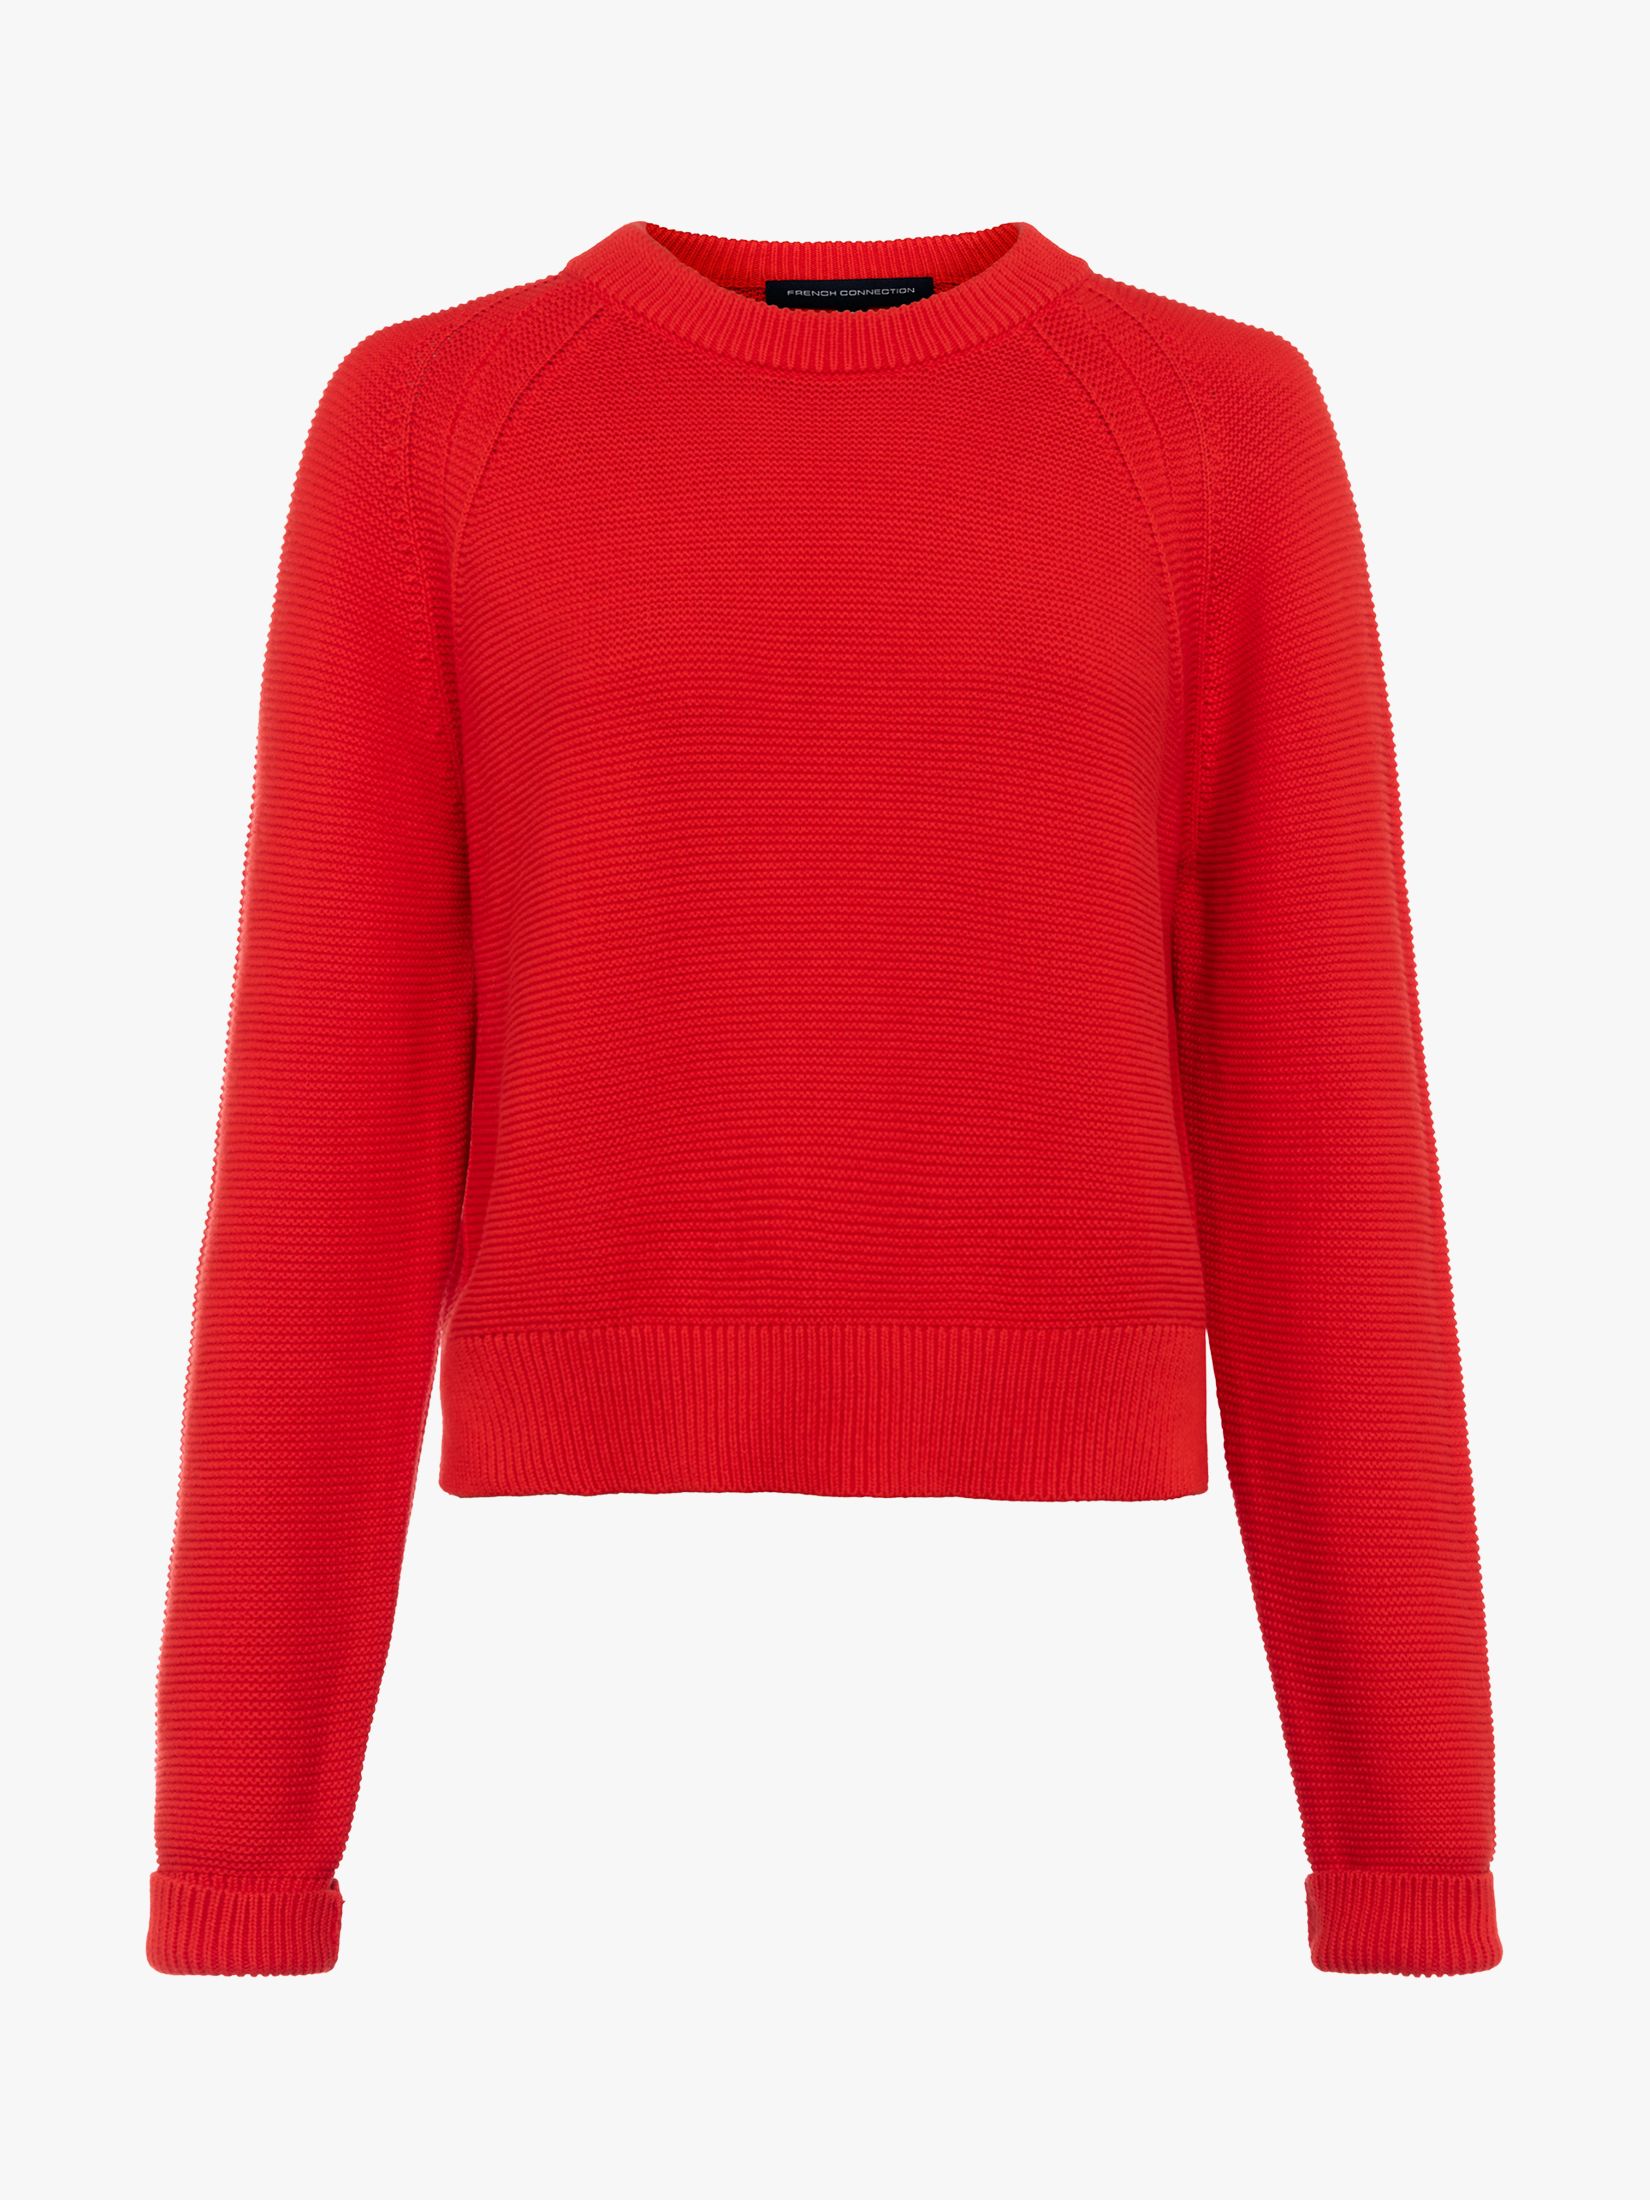 French Connection Lilly Mozart Crew Neck Jumper, Fiery Red at John ...